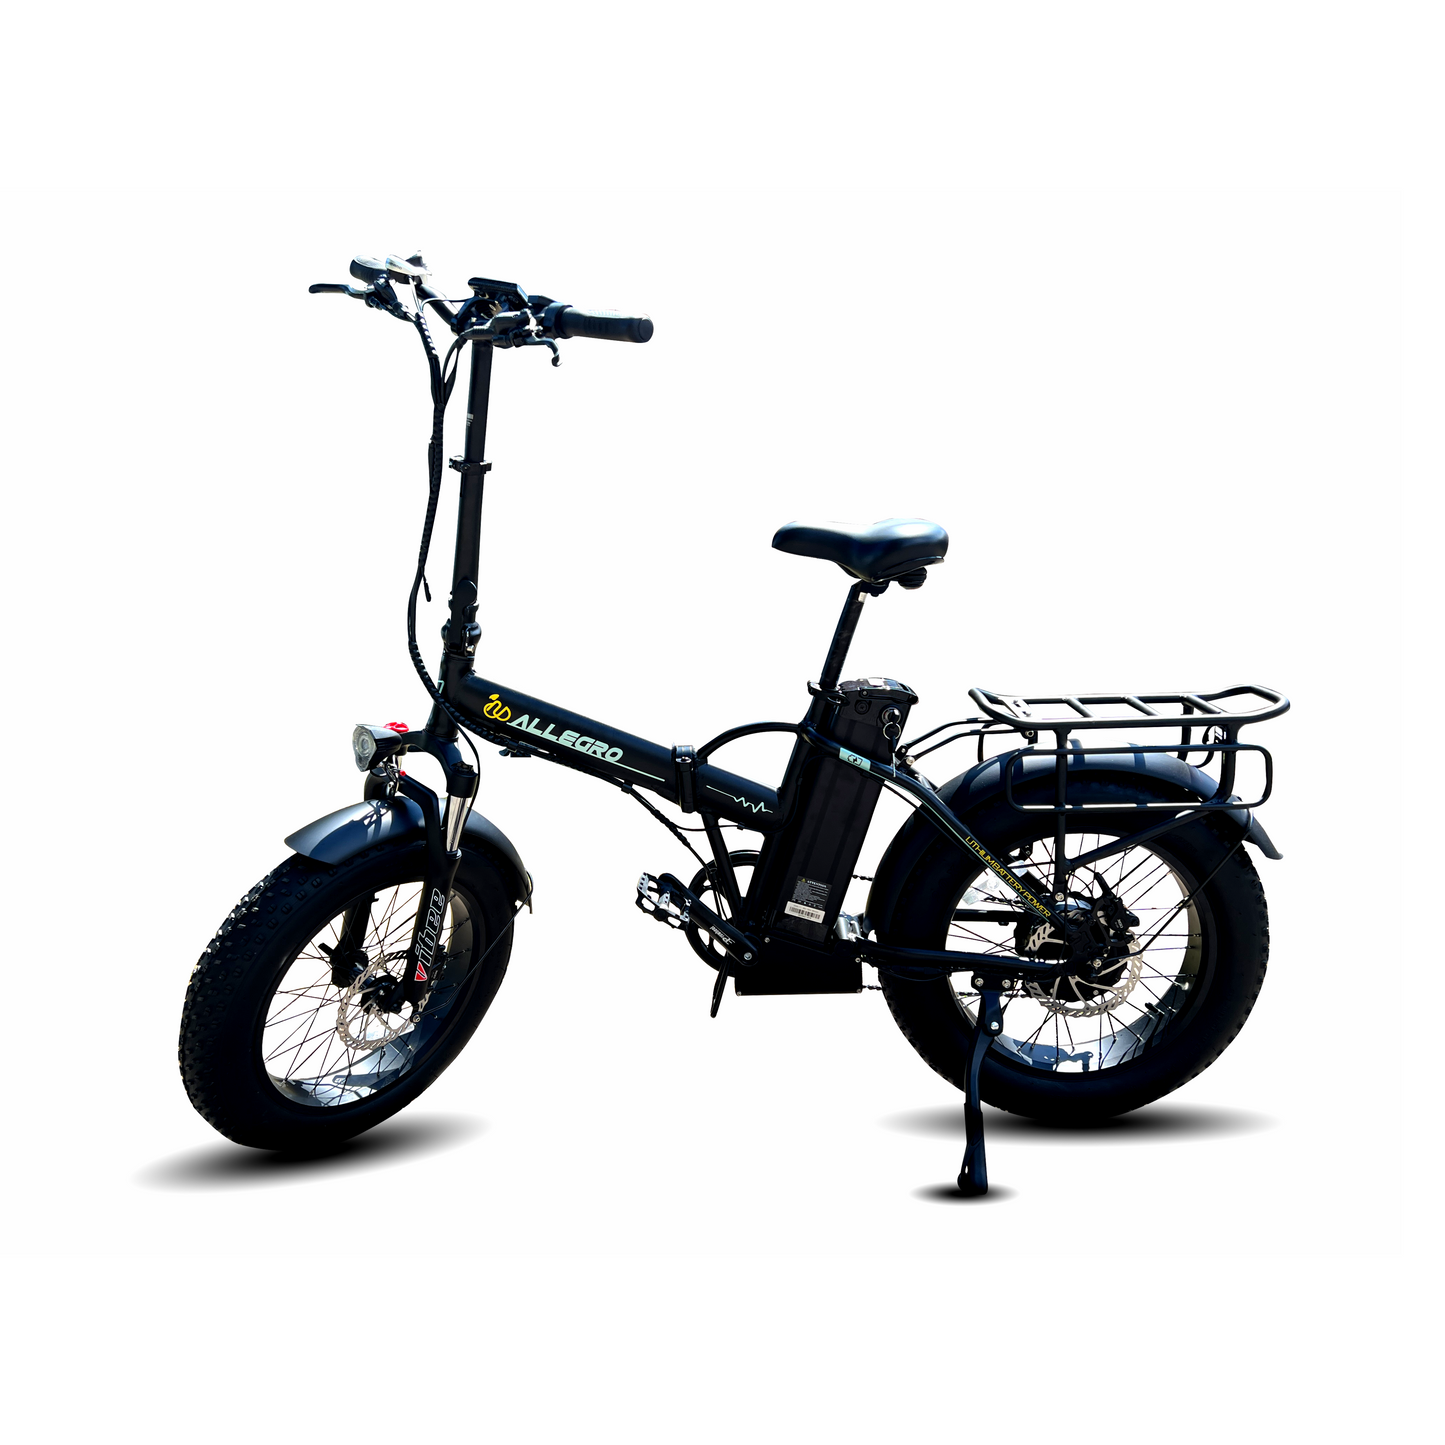 Isolated view of the Allegro Electric Bike on a white background, highlighting its design.